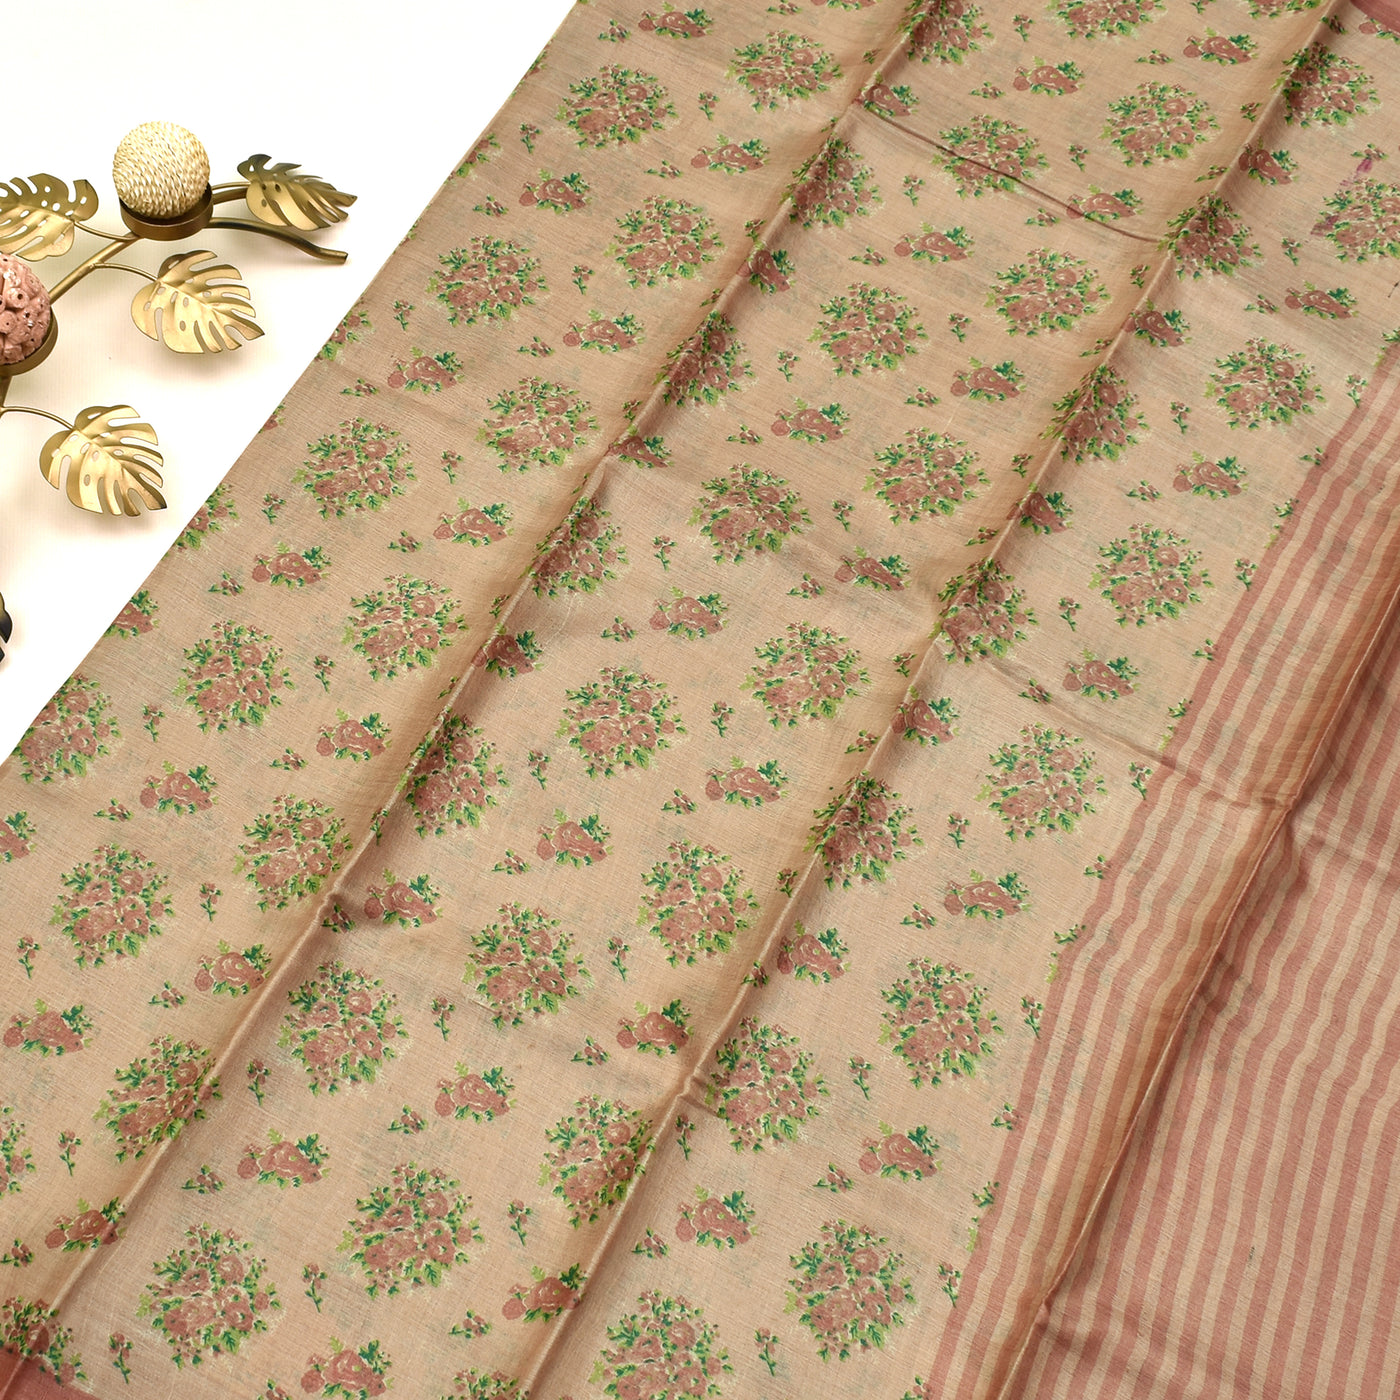 Onion Pink Tussar Silk Saree with Floral Printed Design